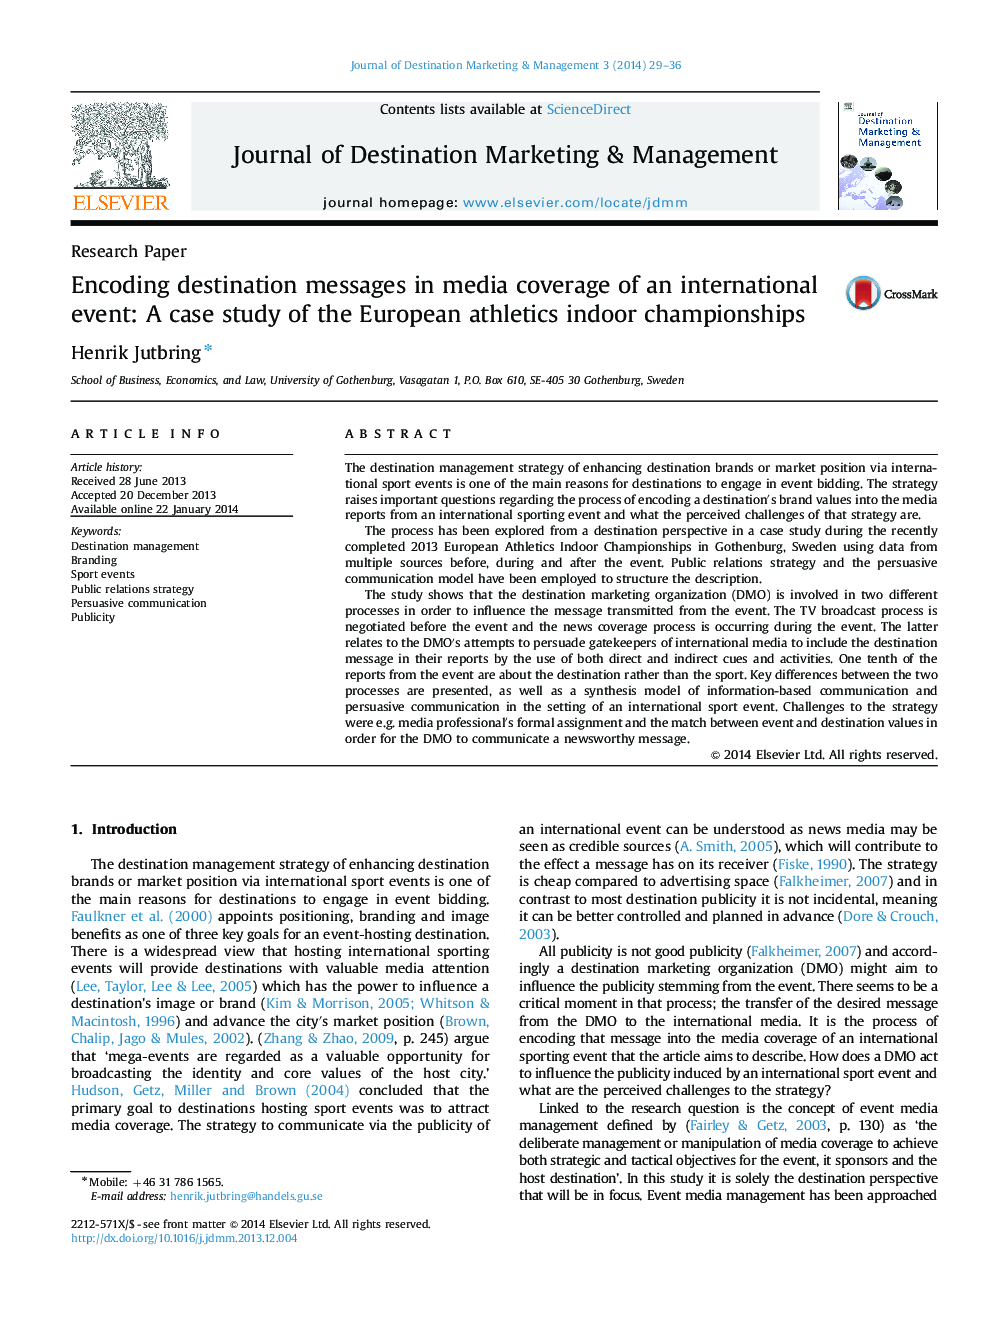 Encoding destination messages in media coverage of an international event: A case study of the European athletics indoor championships